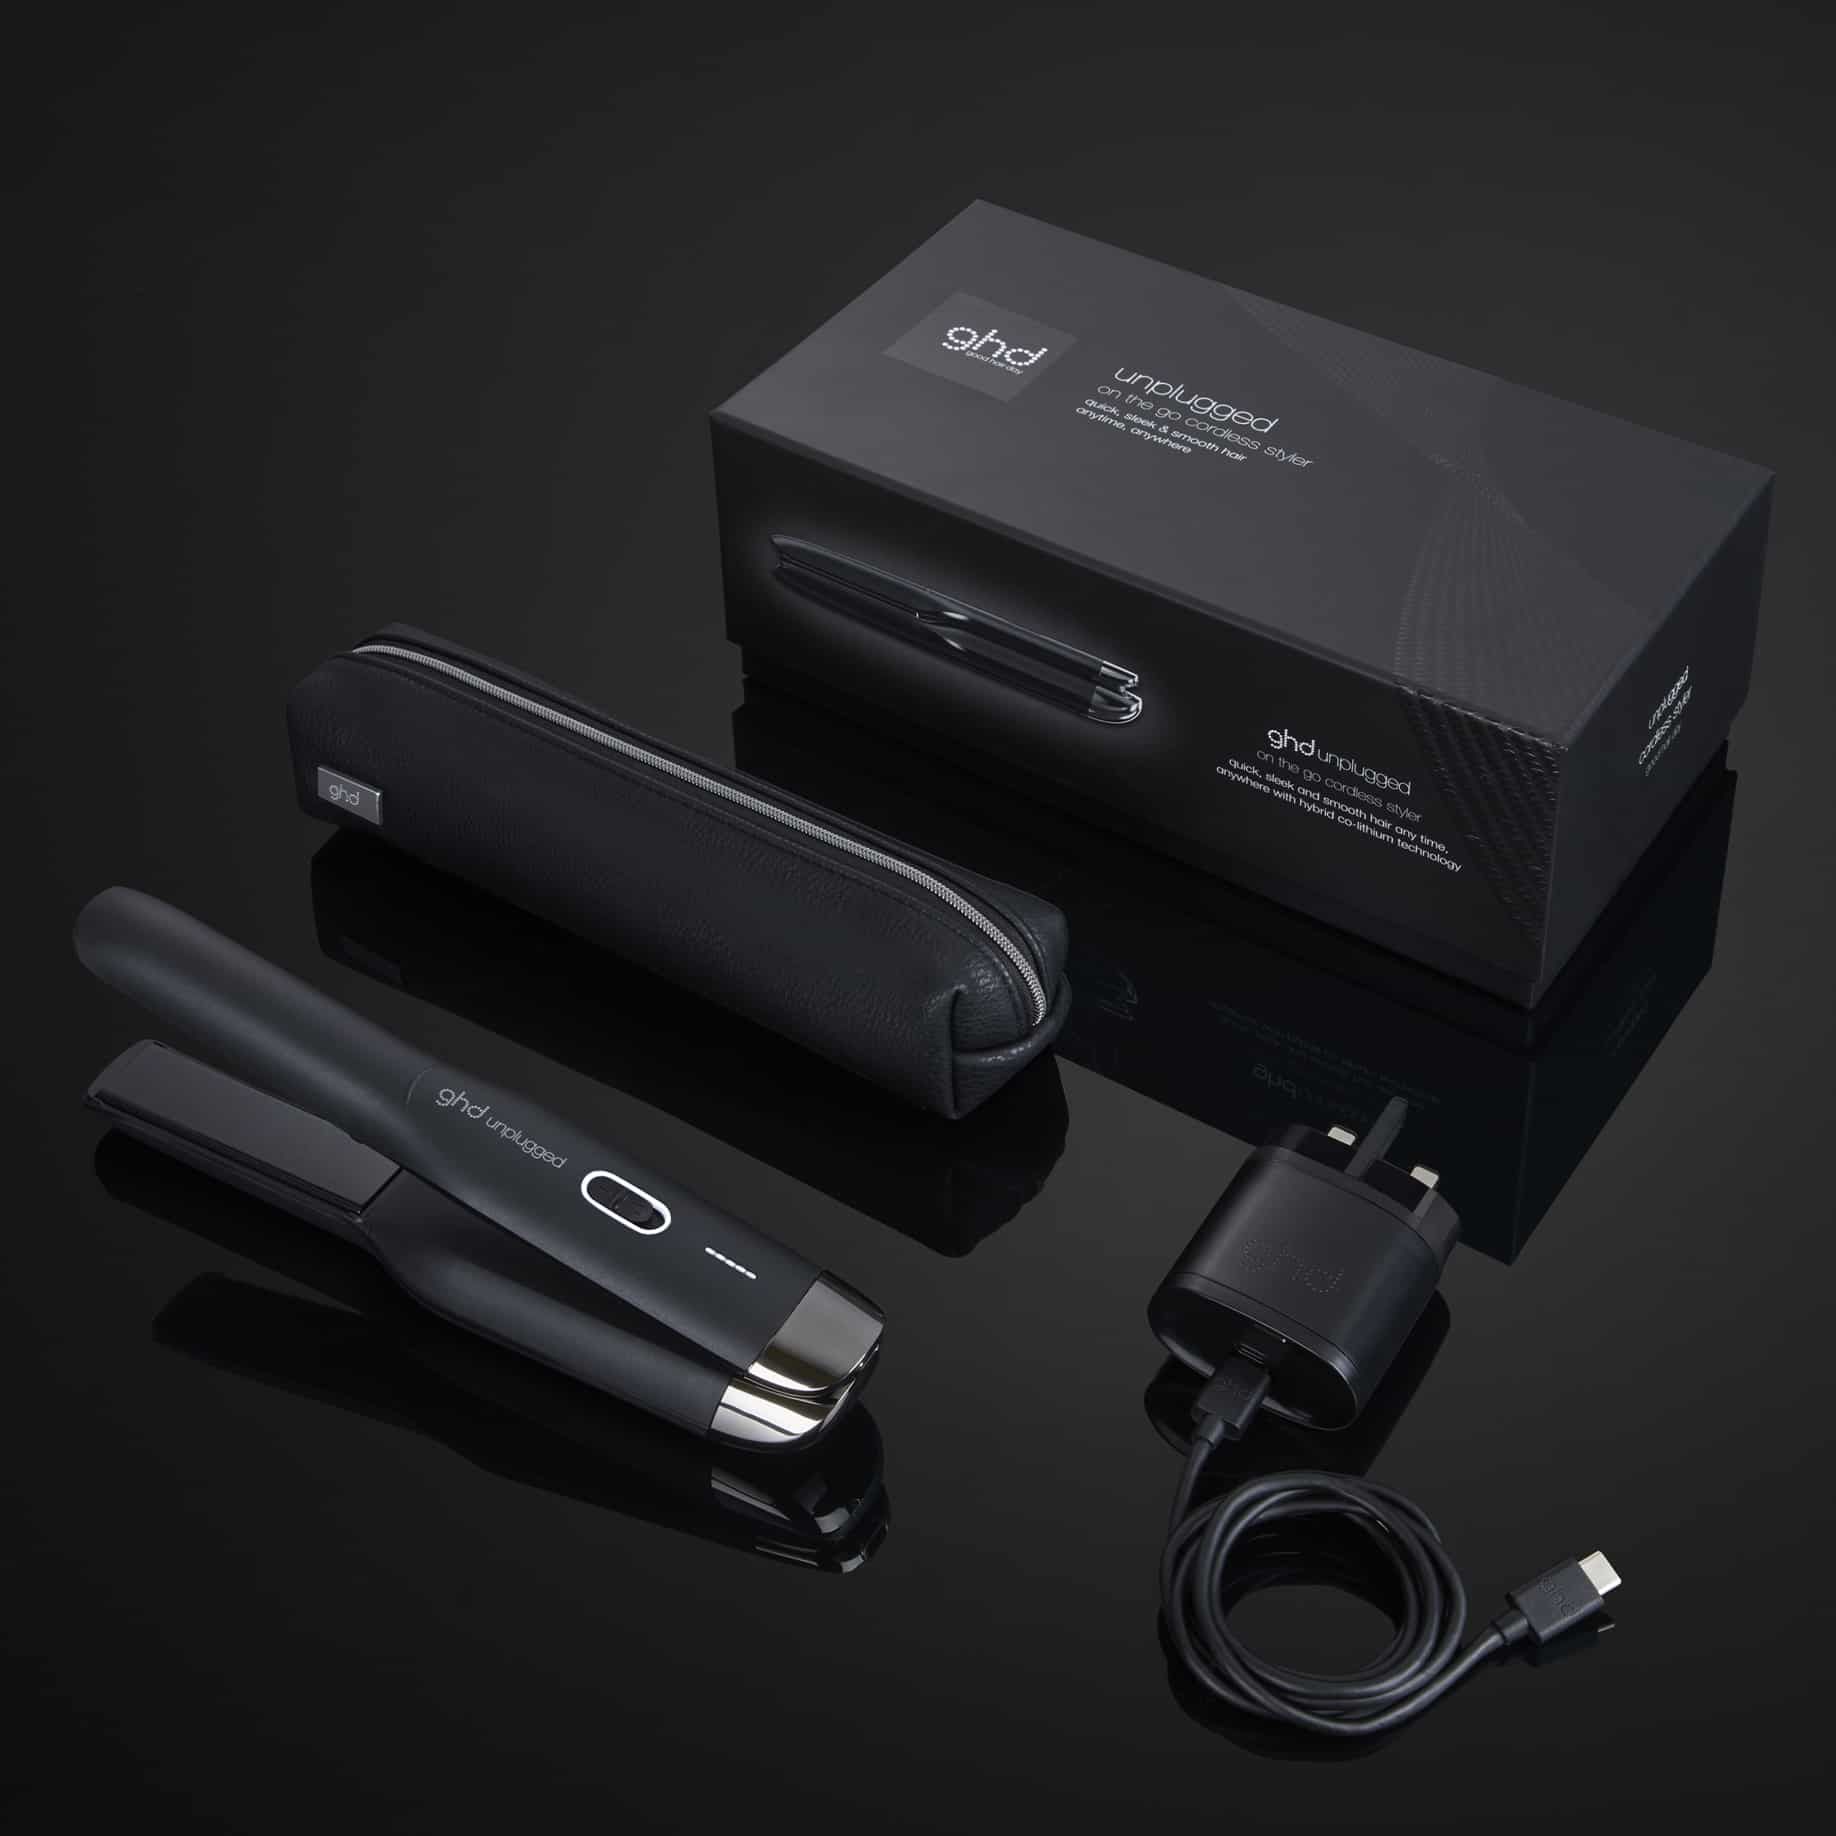 <p><strong>£299.00</strong></p><p><a href="https://www.ghdhair.com/hair-straighteners/ghd-unplugged-black-p-552?gad_source=1&gclid=CjwKCAiA0syqBhBxEiwAeNx9N95xGeyfciEjYaHikTddFgjFAoy49daYmCNMnMmmTUmEK5ttOihZFBoCAGsQAvD_BwE">Shop Now</a></p><p><strong>With a whopping £100 off for Cyber Monday, this has already sold out in Black, but you can get black in the festive gift set or the peach or white colour.</strong></p><p>ghd were not playing around when they concocted this clever cordless straightener... The hair tool brand are known for always delivering when it comes to styling essentials, and it seems the Unplugged Styler is no exception.</p><p>The battery takes 2 hours to fully charge, and offers up 20 minutes of continuous styling at ghd's optimum temperature of 185°C.</p><p>A little more tech-savvy than some of the other models, the ghd styler features a USB-C connector & plug, making it even more versatile and travel-friendly than others.</p>